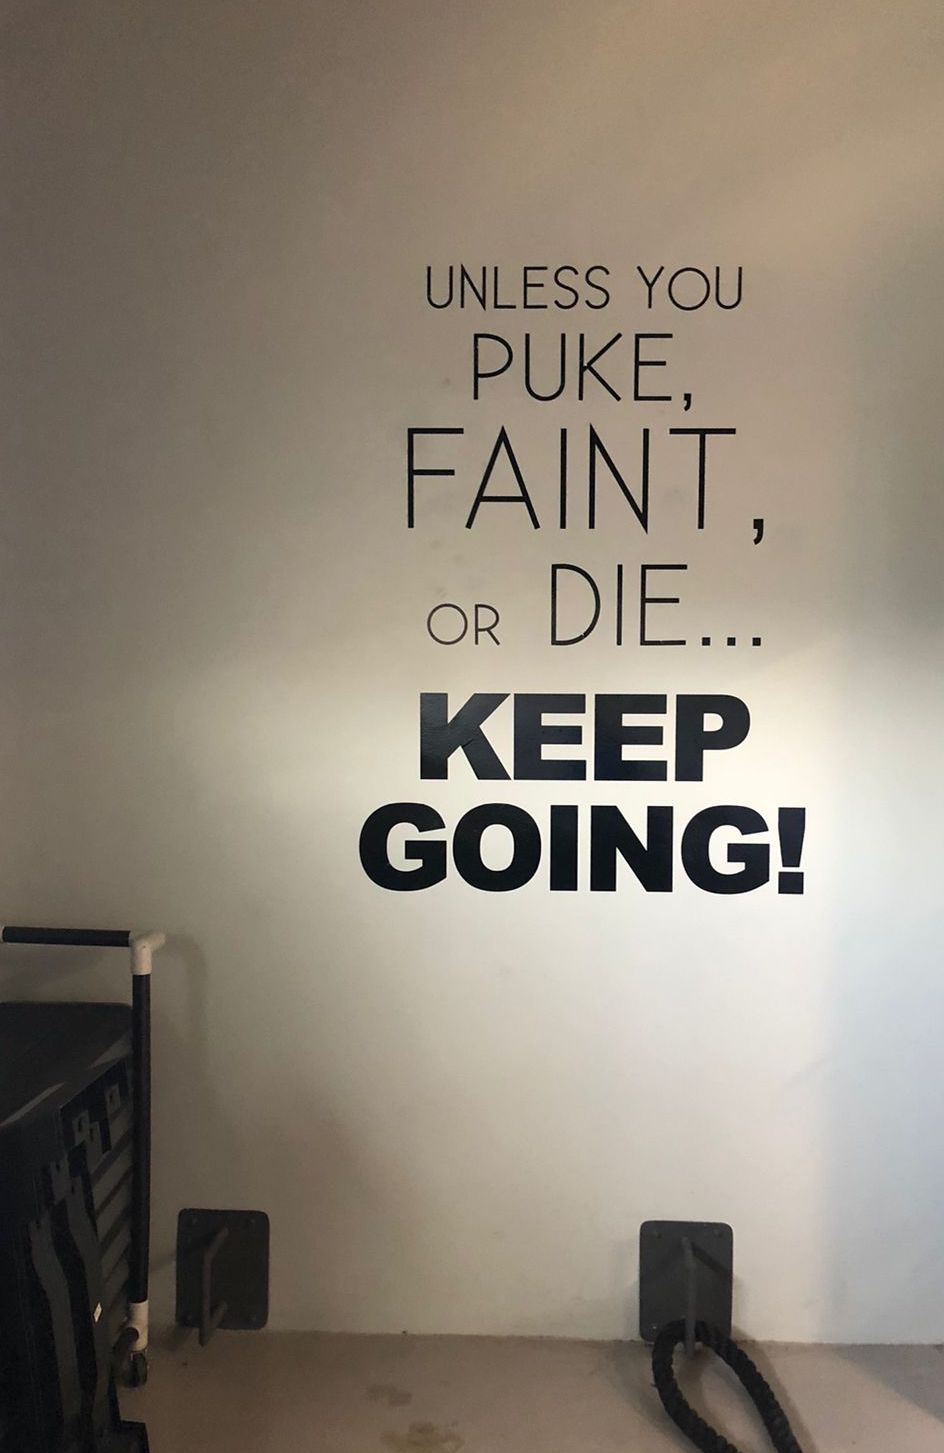 unless you puke, faint or die, keep going!